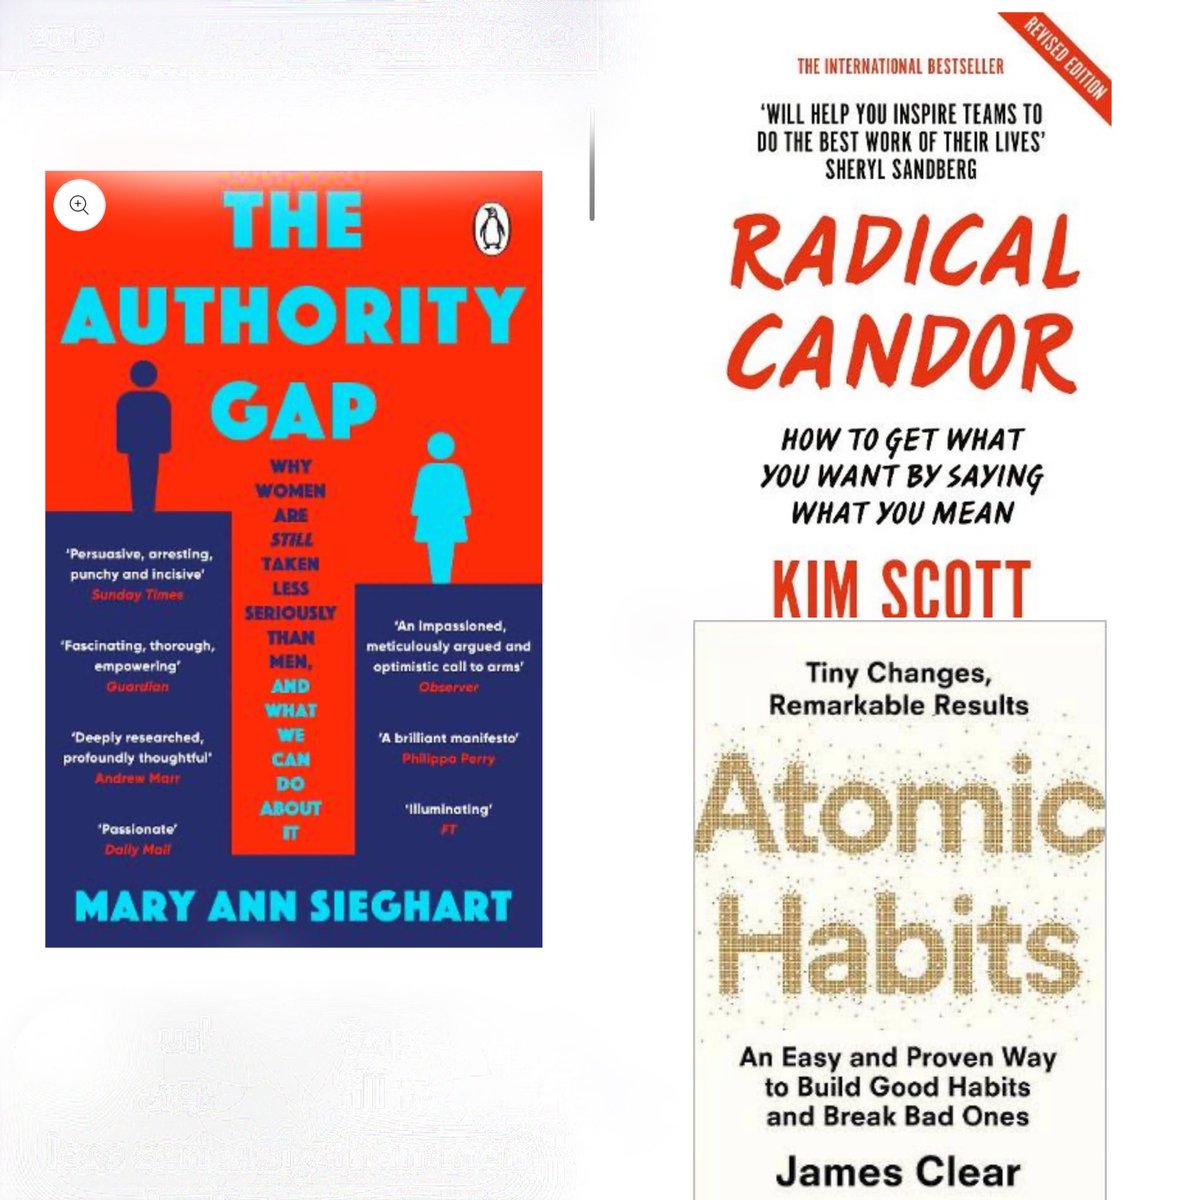 Hey Twitter 👋🏻 looking for leadership, people focused, self development or strategy non-fiction book recommendations… if I really enjoyed #RadicalCandor #AtomicHabits and #TheAuthorityGap - what should I read next?